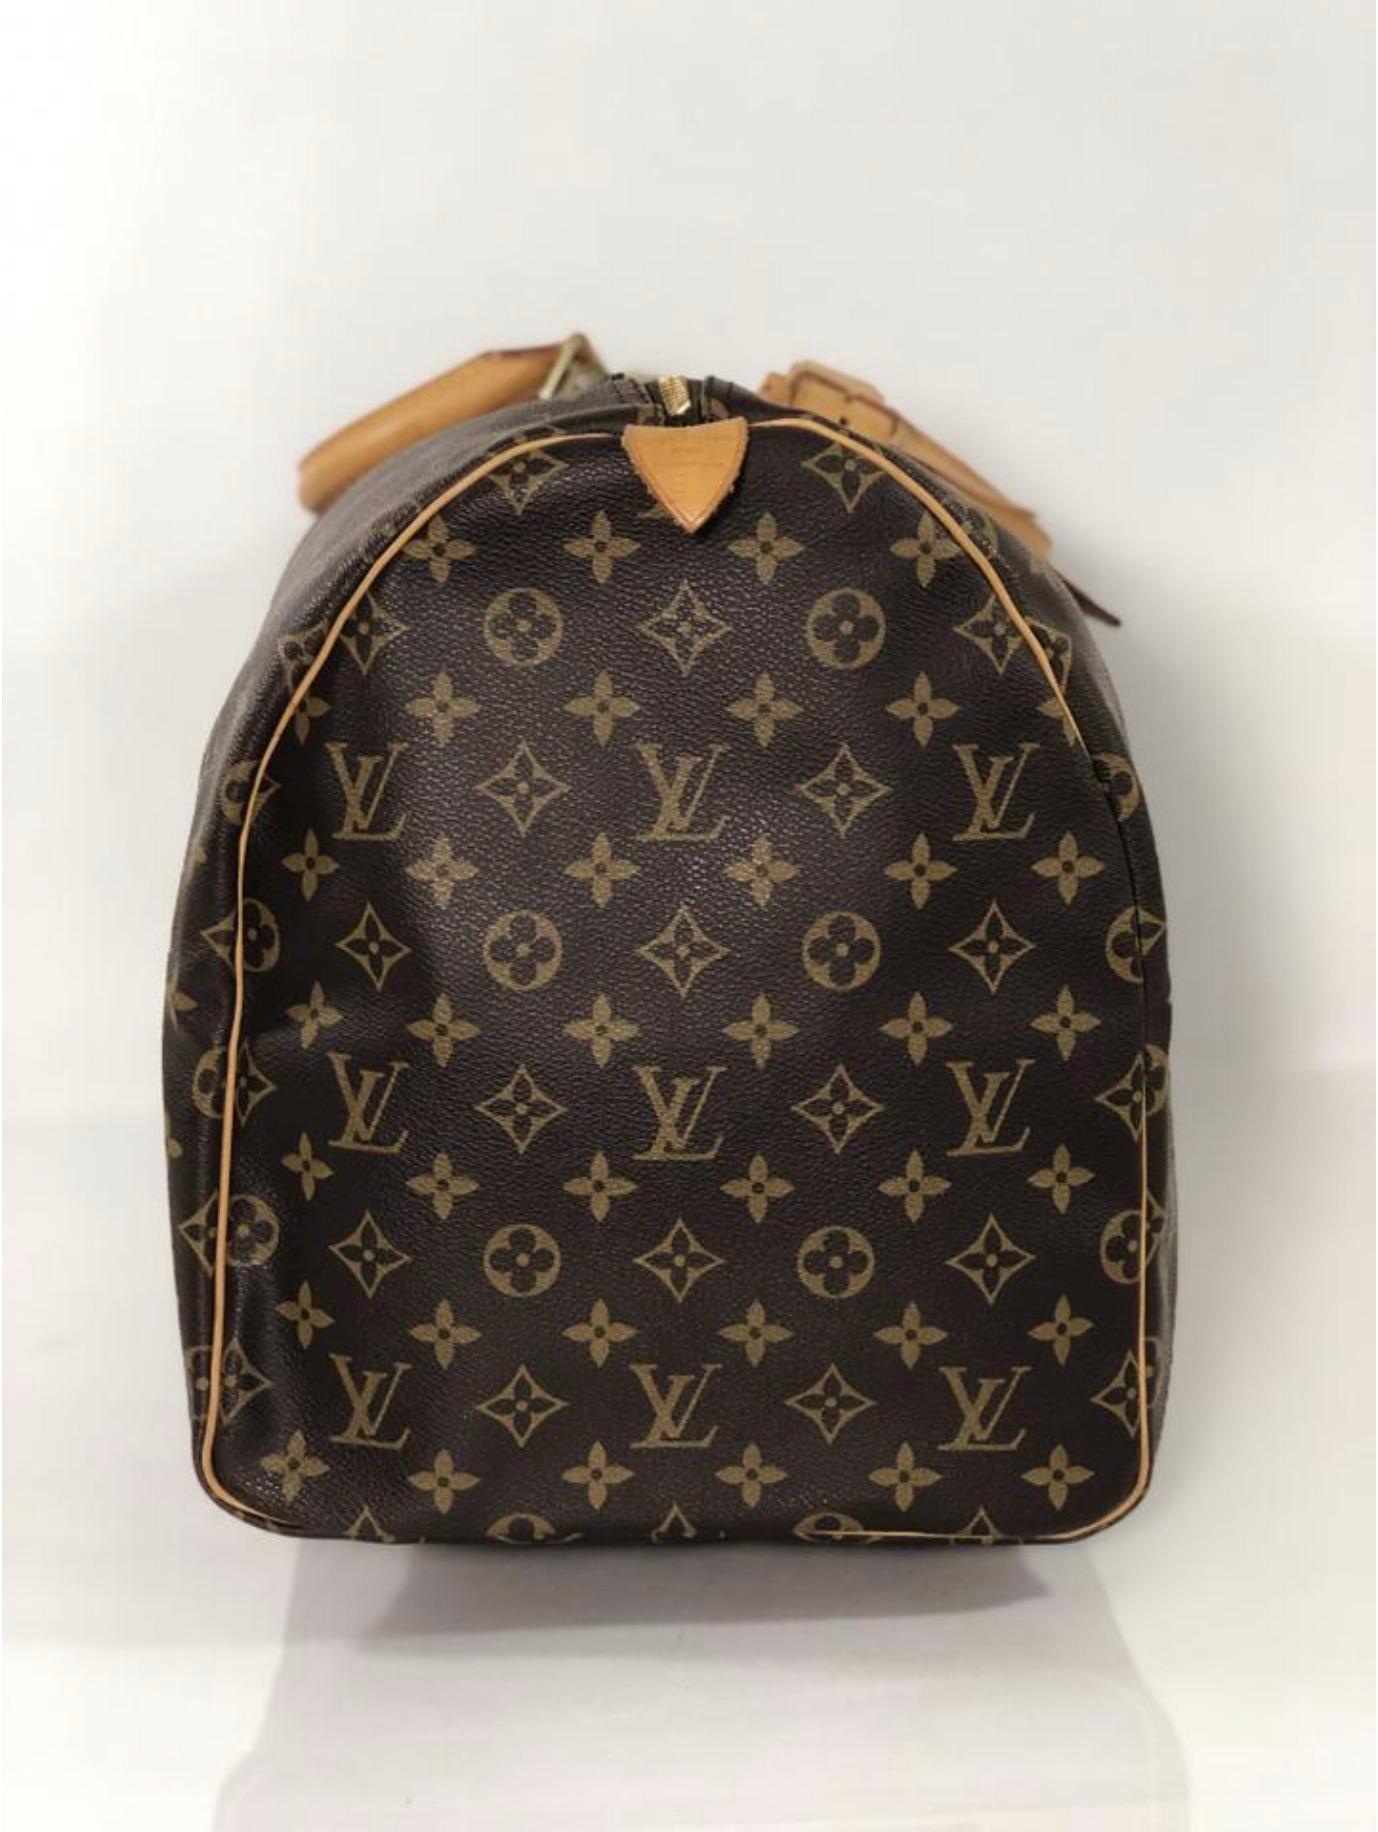  Louis Vuitton Monogram Keepall 55 Top Handle Travel Bag In Good Condition For Sale In Saint Charles, IL